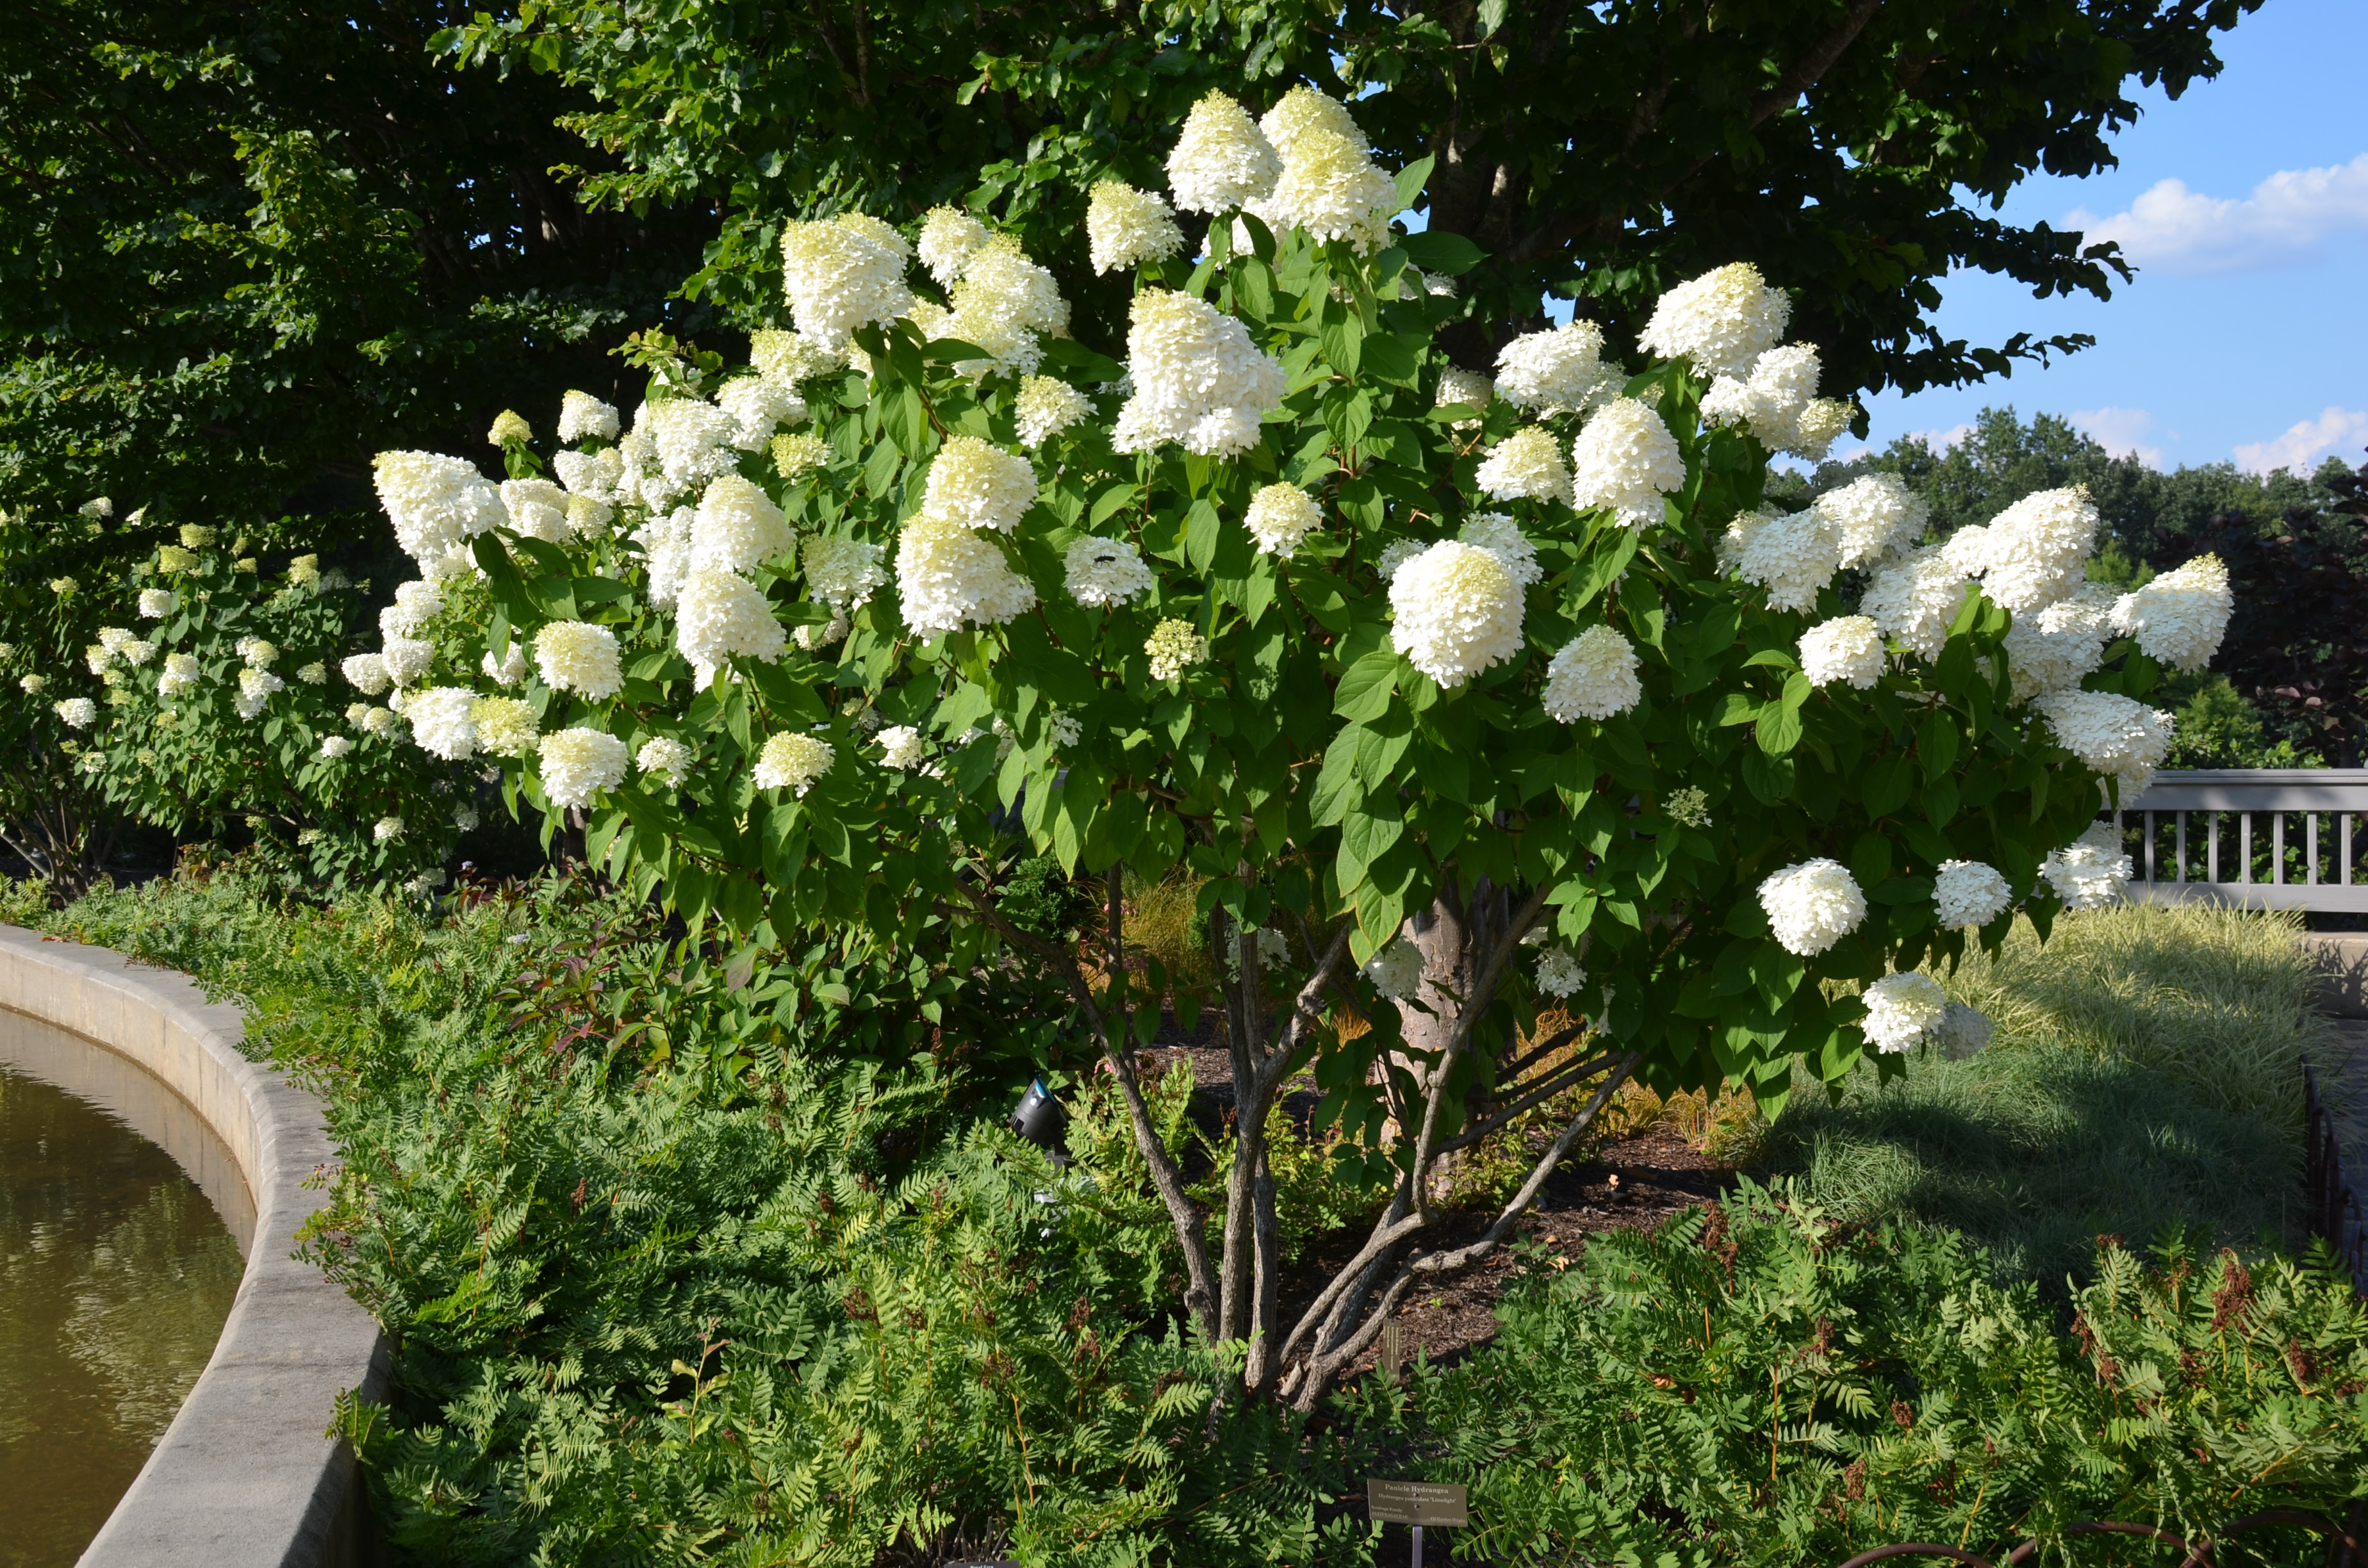 Smaller Alternatives To Limelight Panicle Hydrangea What Grows There Hugh Conlon Horticulturalist Professor Lecturer And Gardener